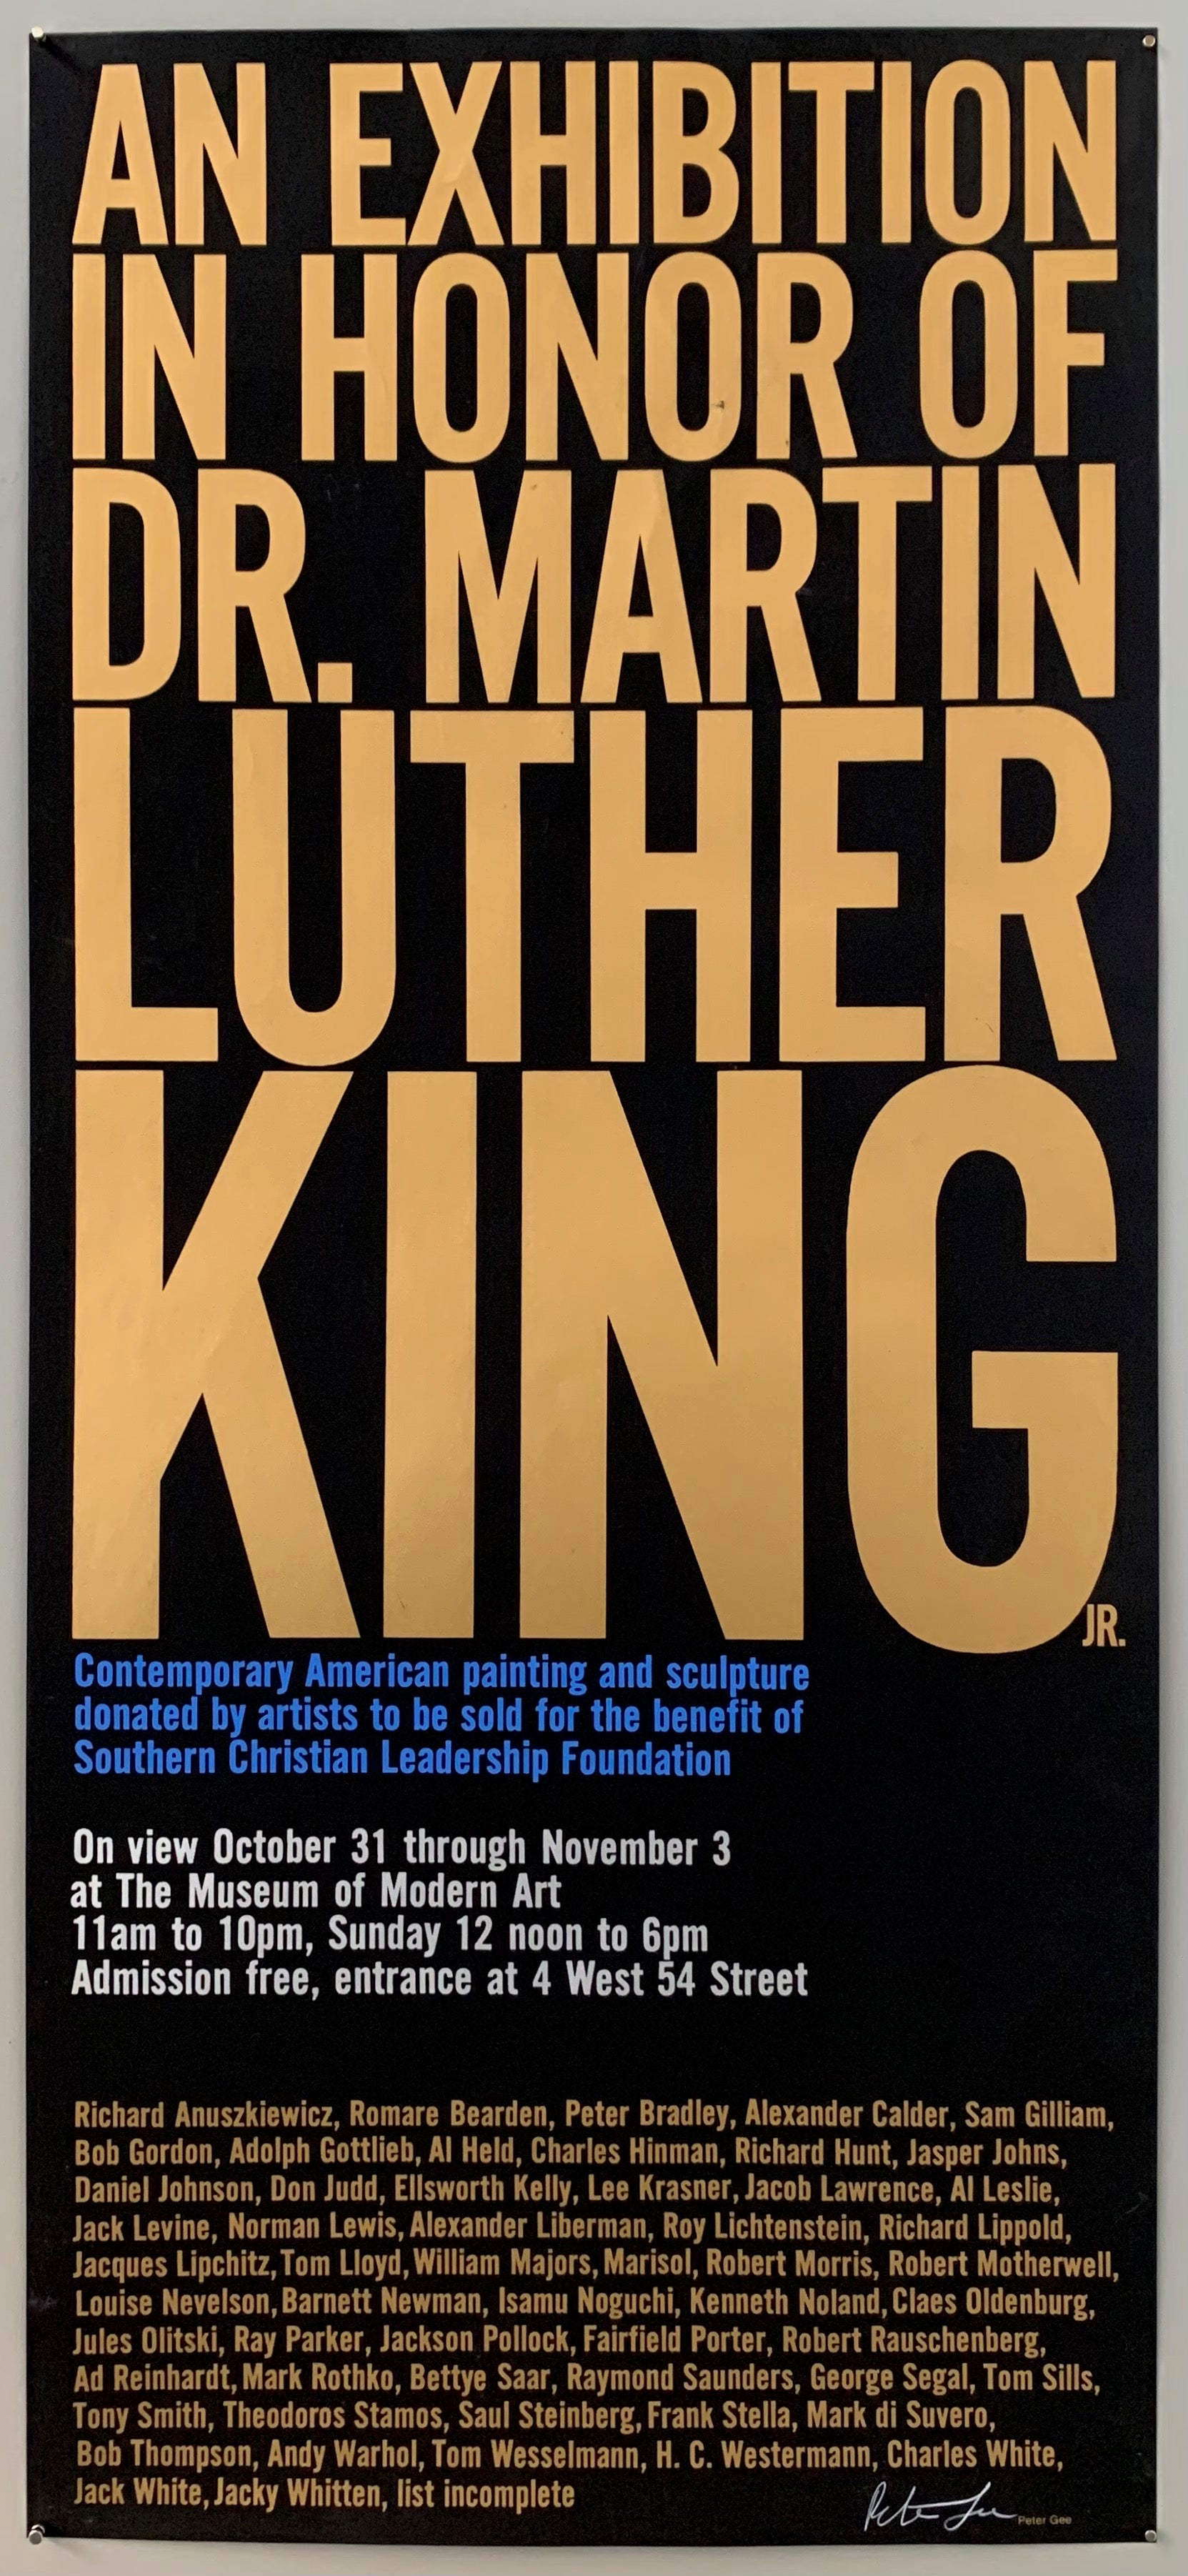 martin luther king poster